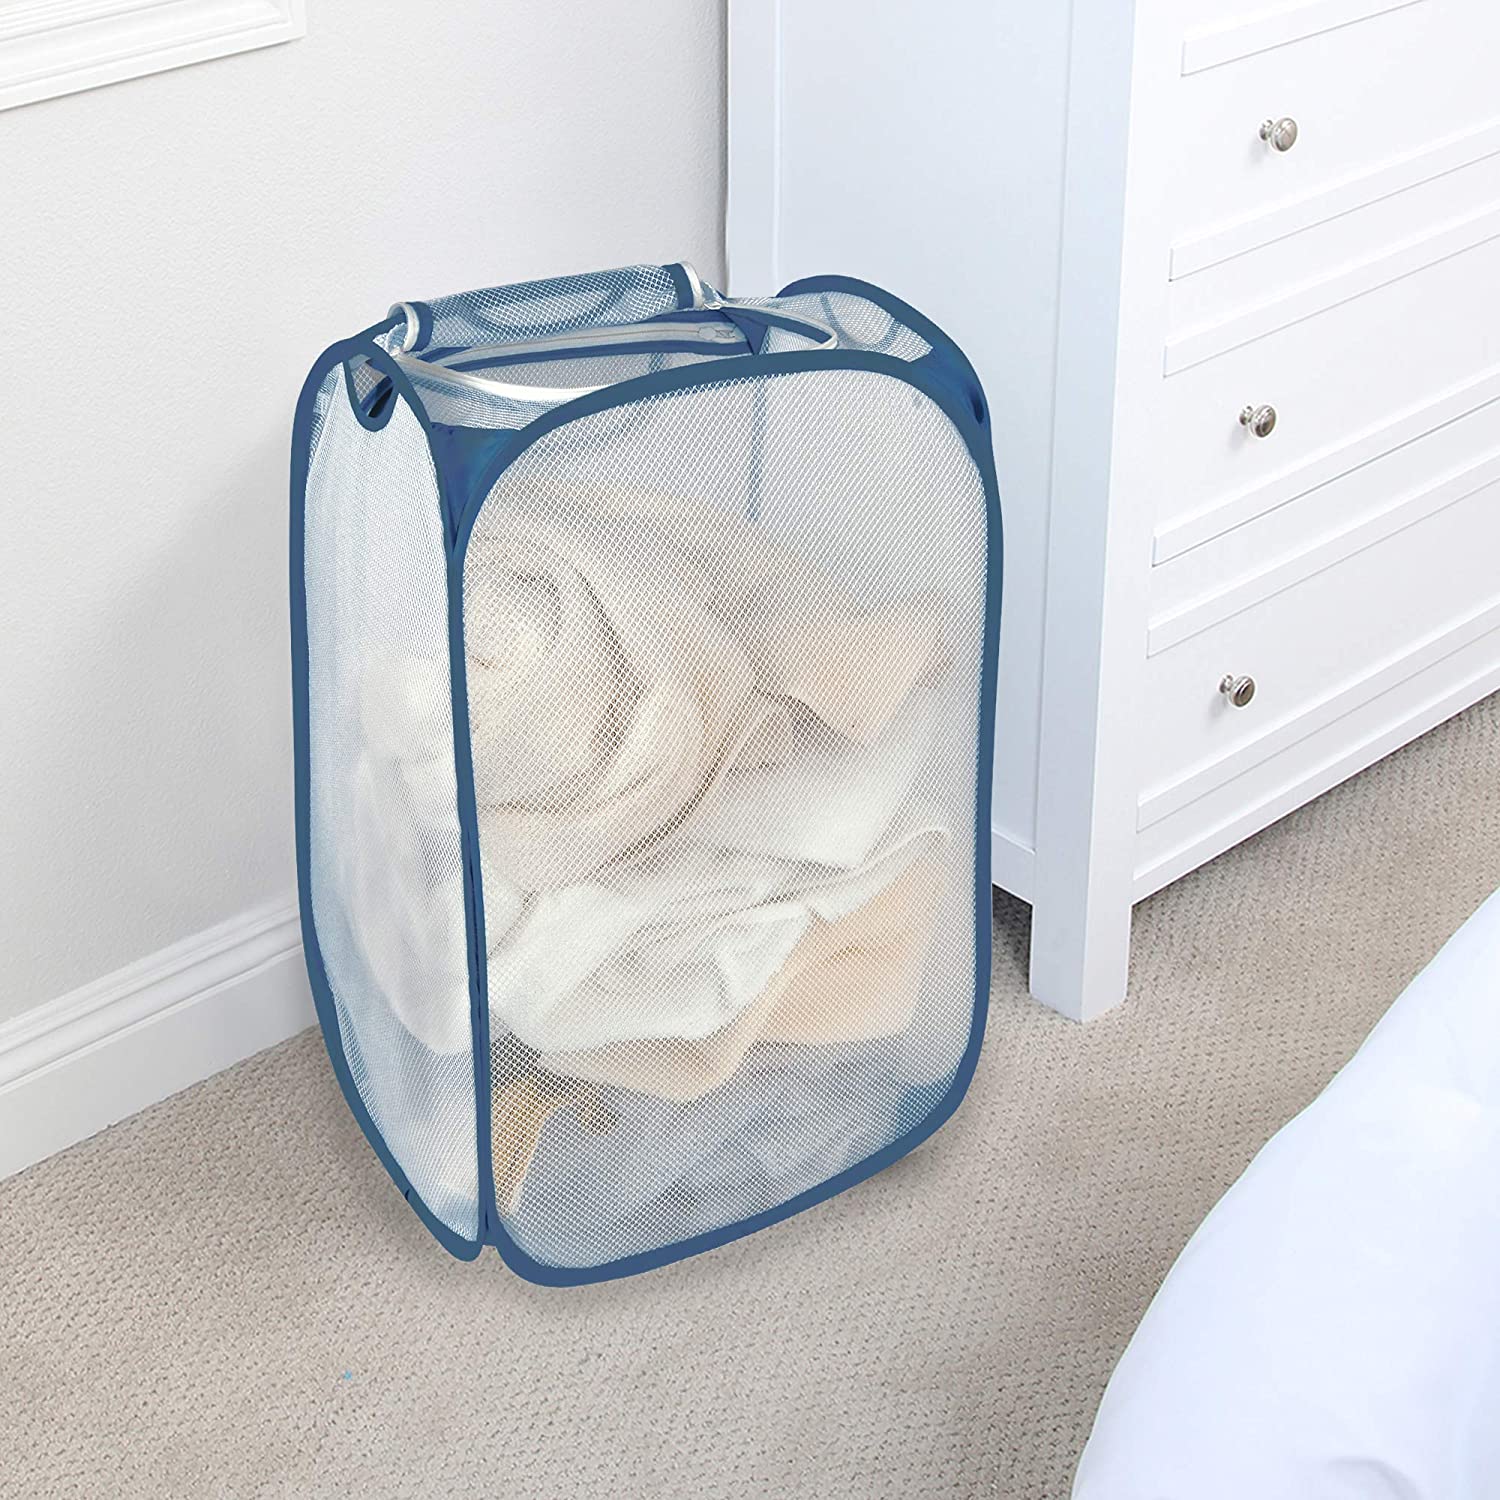 Pro-mart Dazz Deluxe Mesh Pop Up 2 Compartment Laundry Sorter Hamper with White